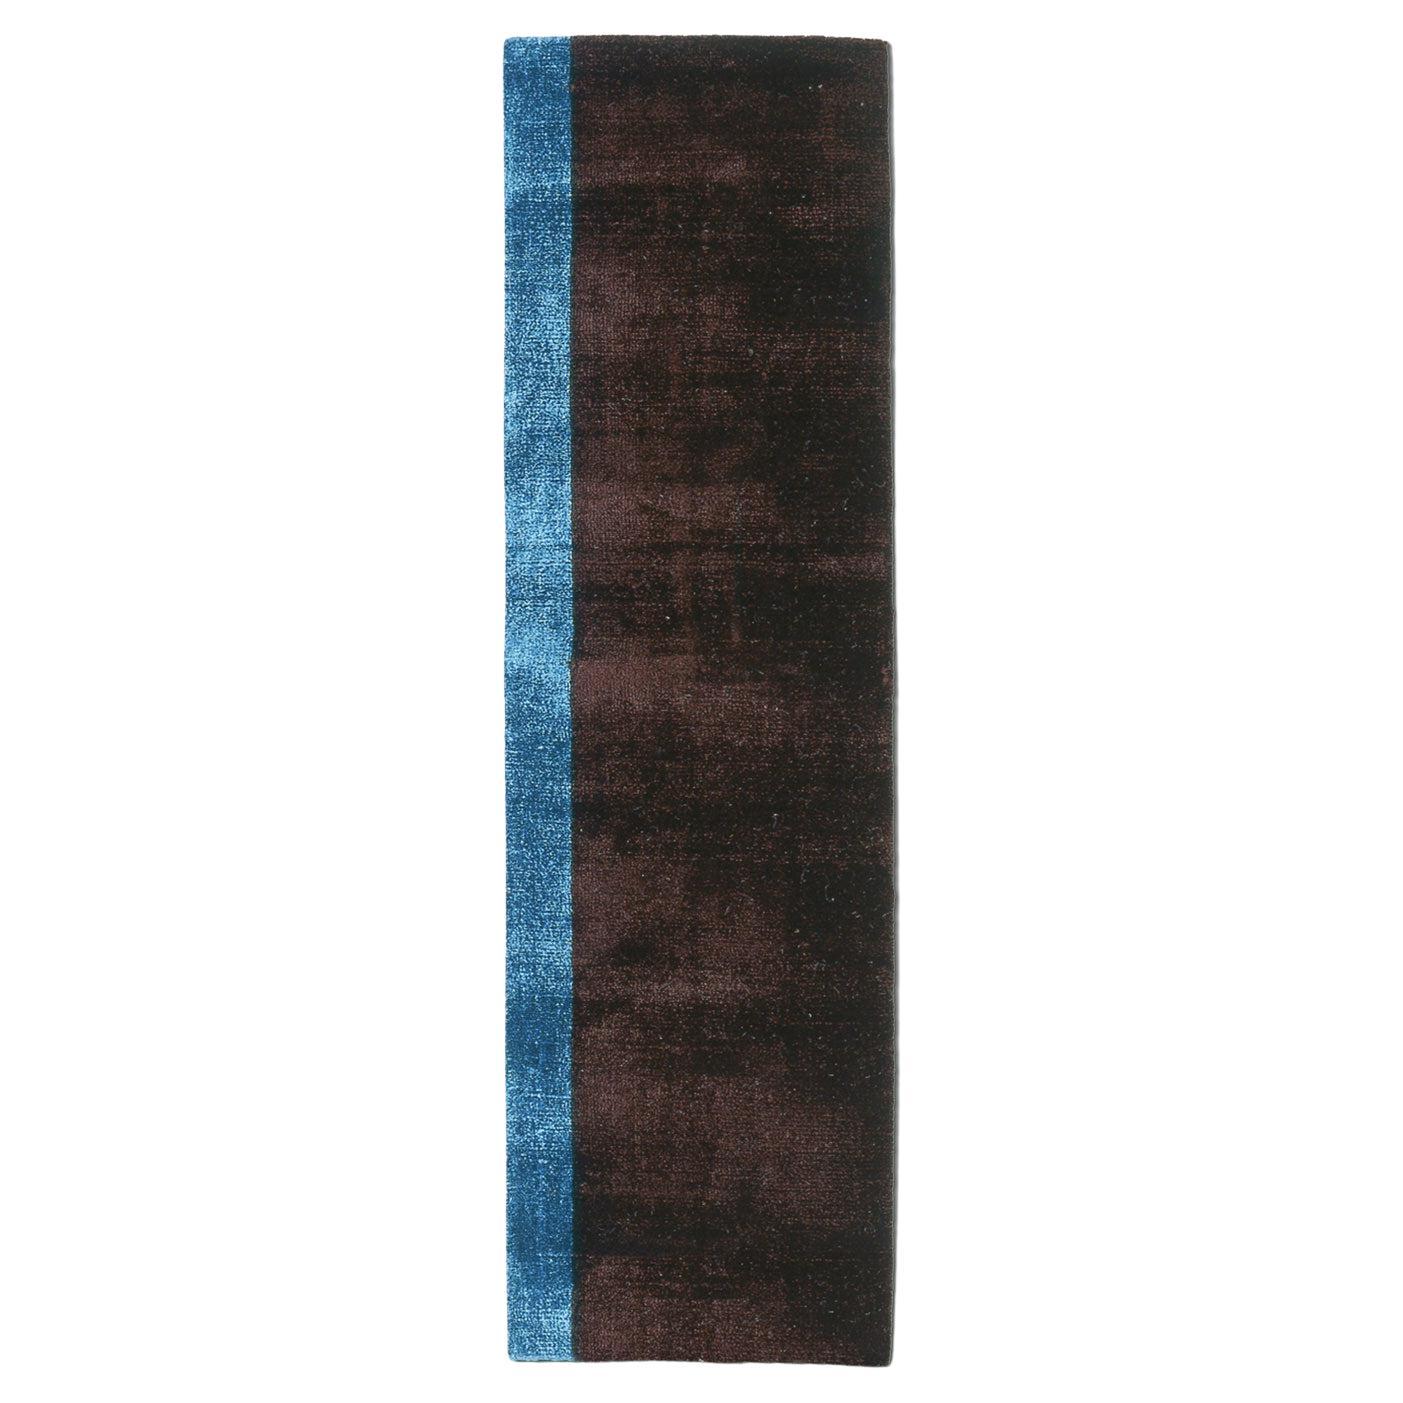 21st Cent Shiny Sky Blue Brown Runner Rug by Deanna Comellini in Stock 70x240 cm For Sale